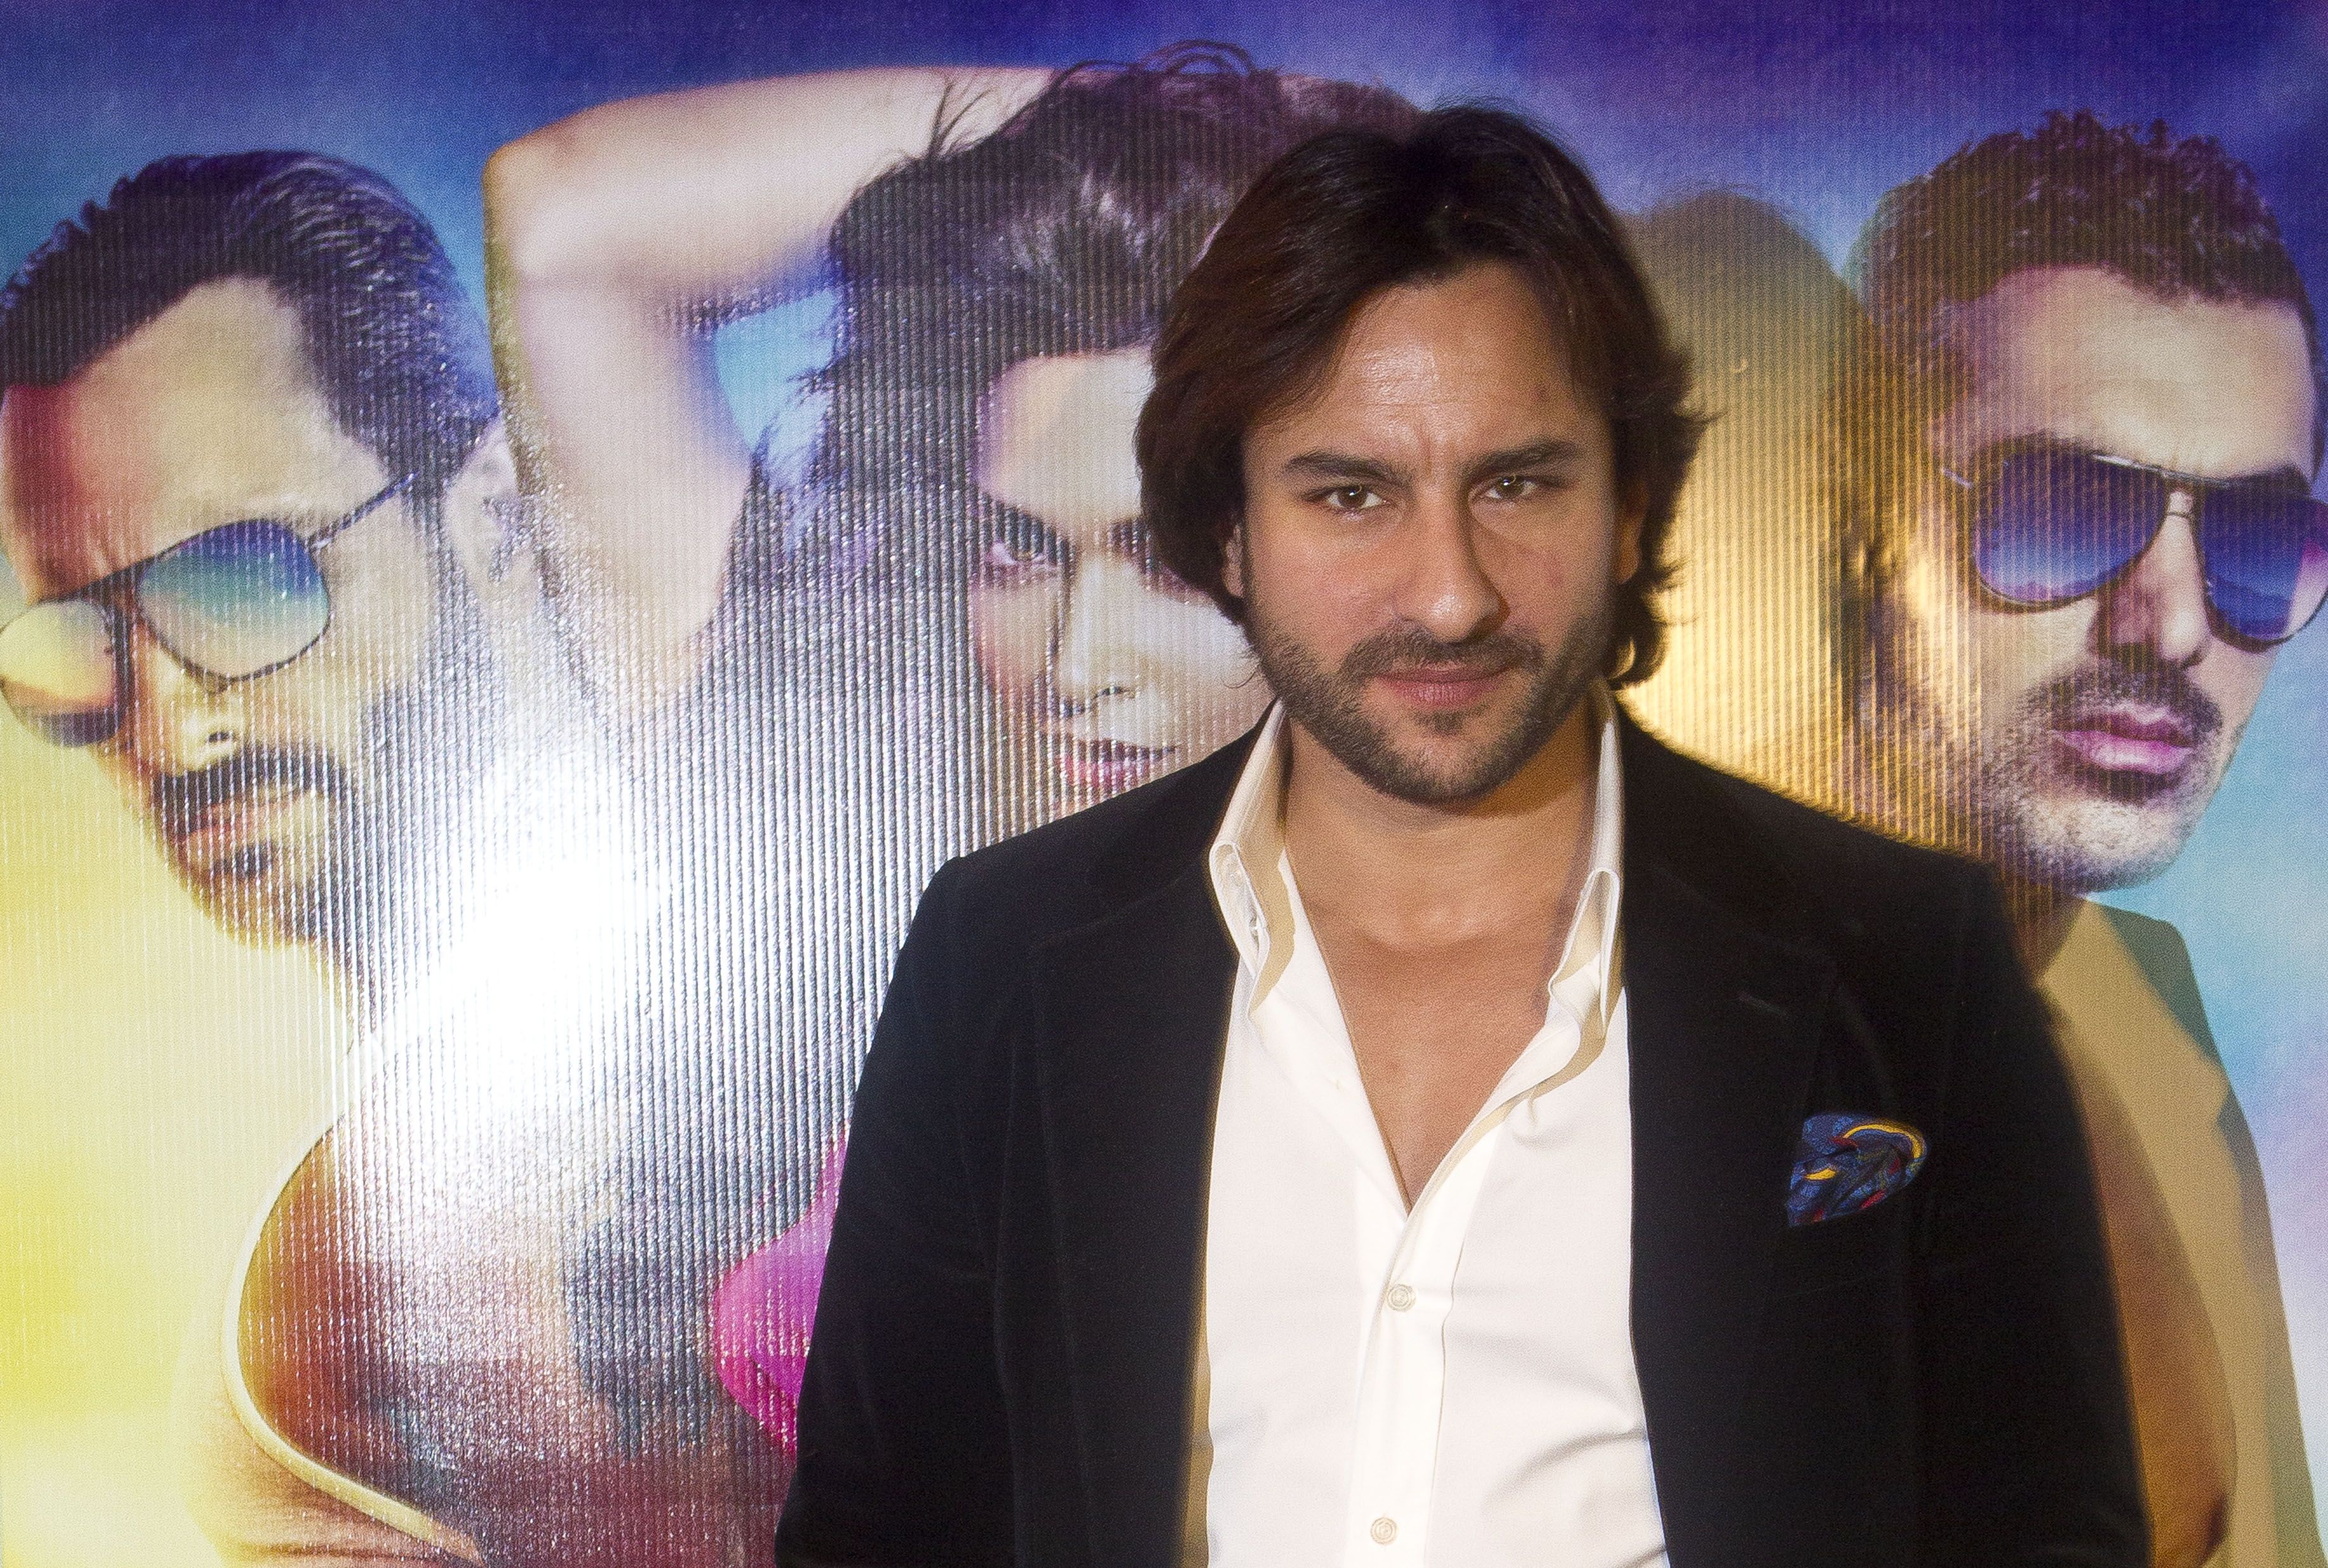 More photos of Saif Ali Khan and the cast of Humshakals promoting movie in  Ahmedabad | Saif Ali Khan Online